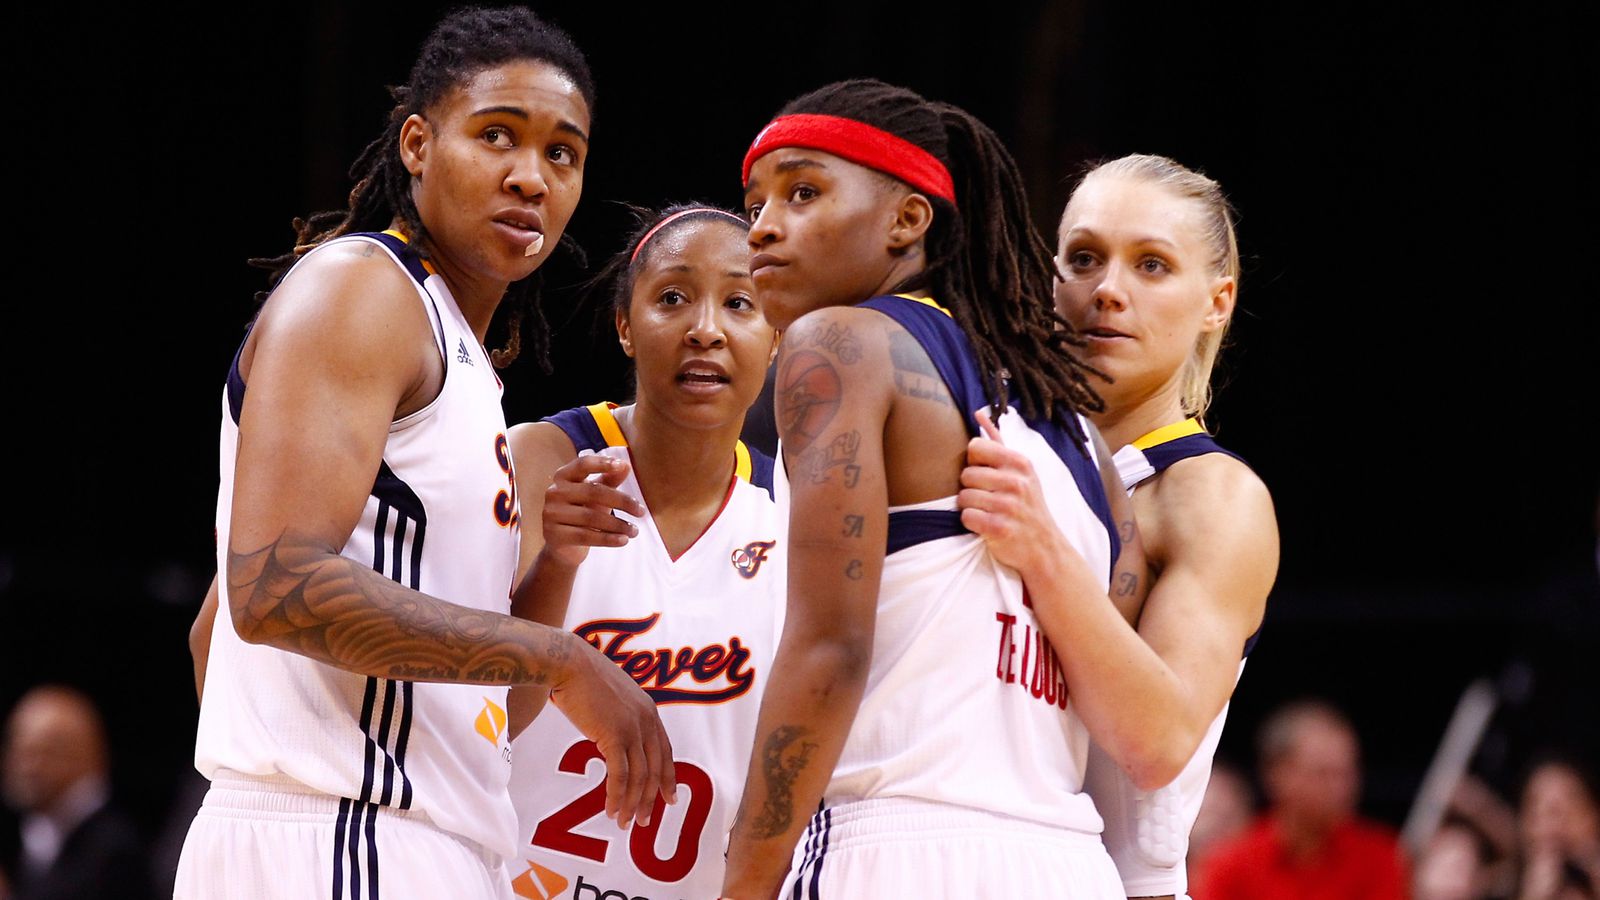 Can the Indiana Fever repeat as WNBA champions in 2013? - Swish Appeal